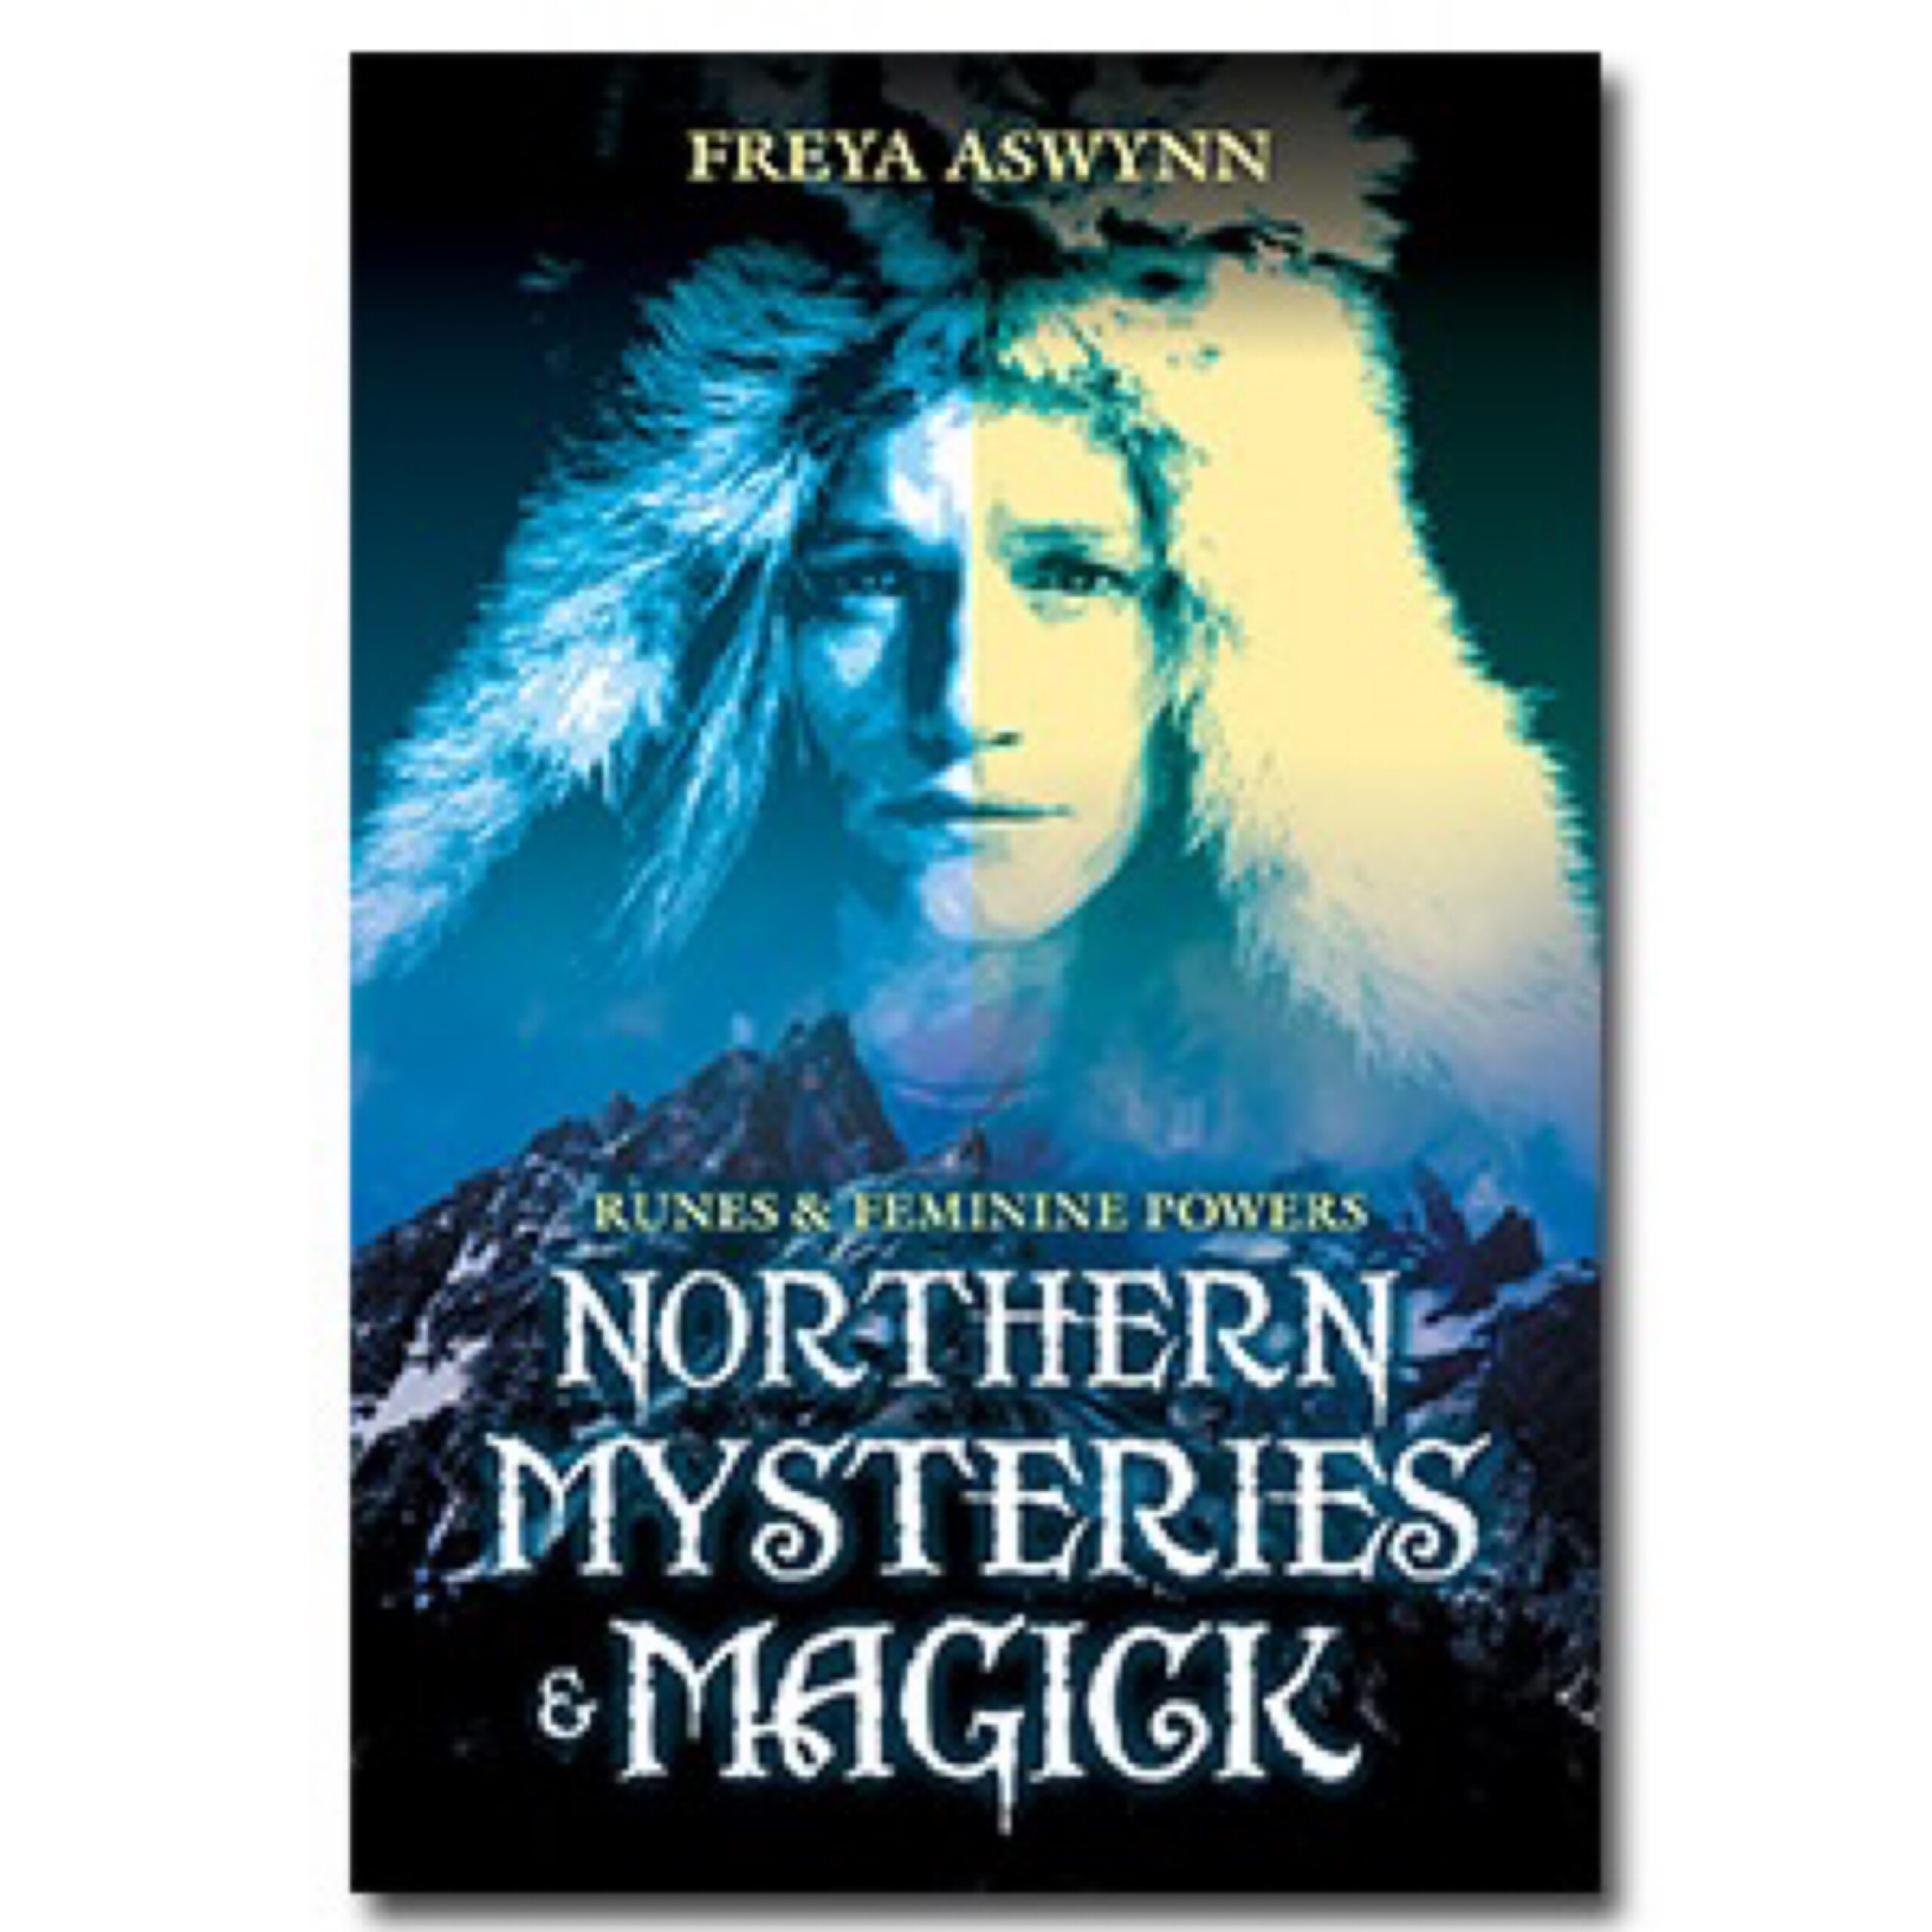 Northern Mysteries and Magick